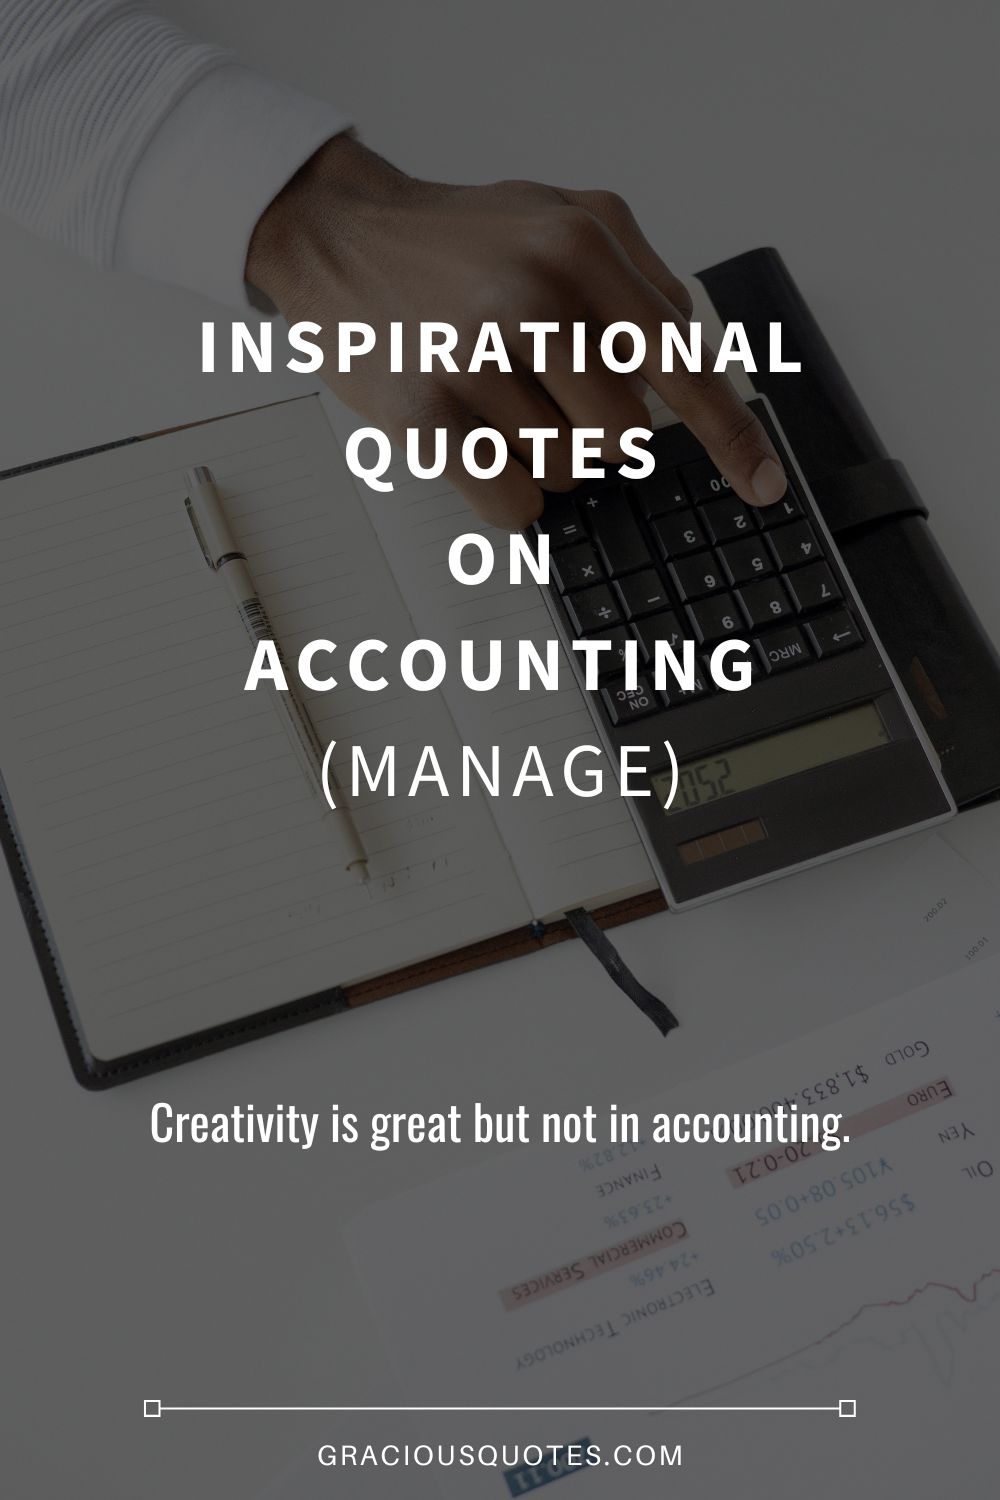 Inspirational Quotes on Accounting (MANAGE) - Gracious Quotes